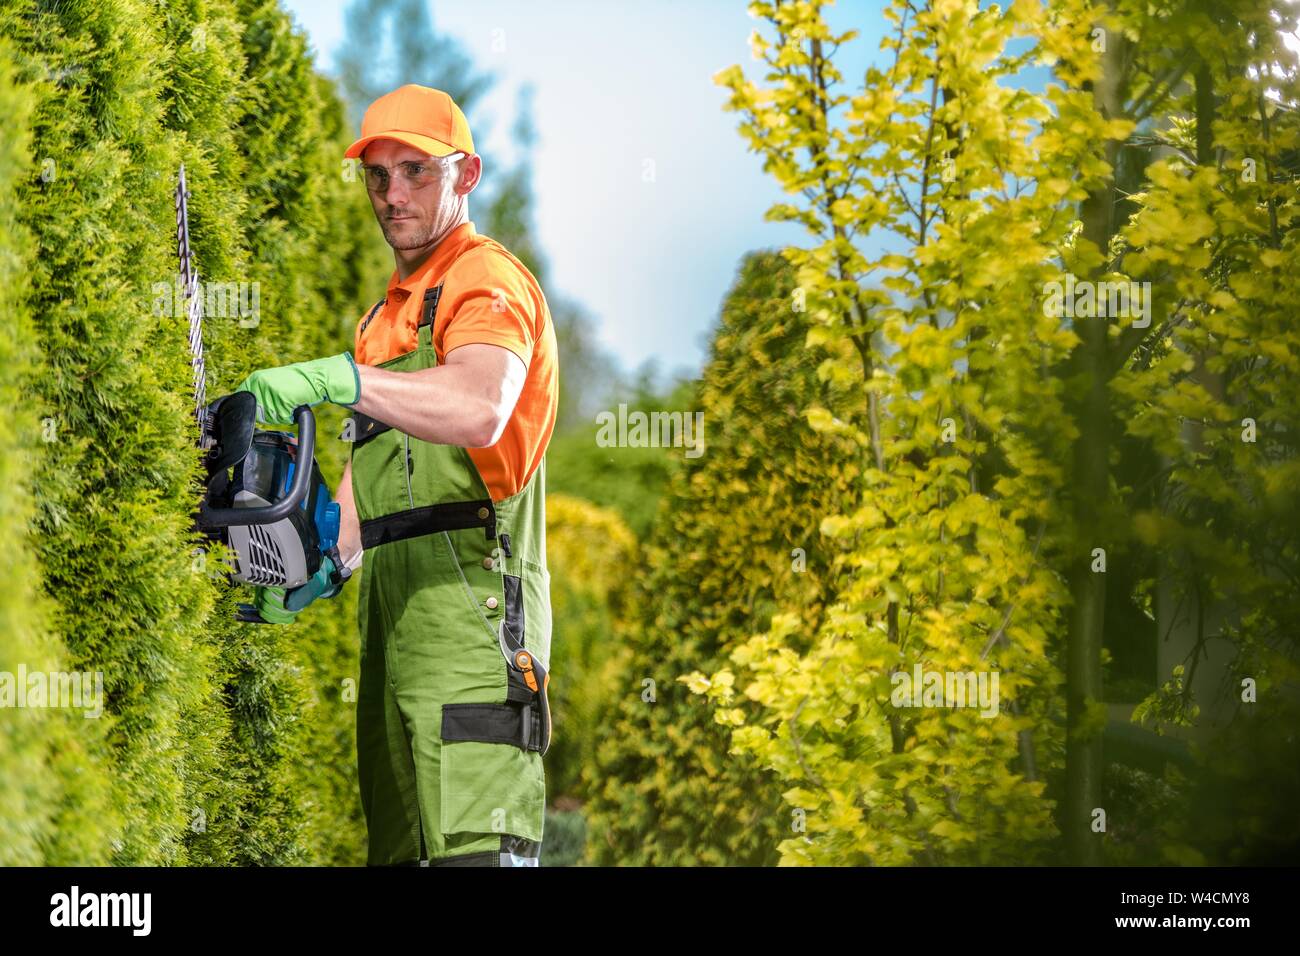 Gardener Green Wall Trimming Using Gasoline Hedge Trimmer. Professional Garden Care. Stock Photo